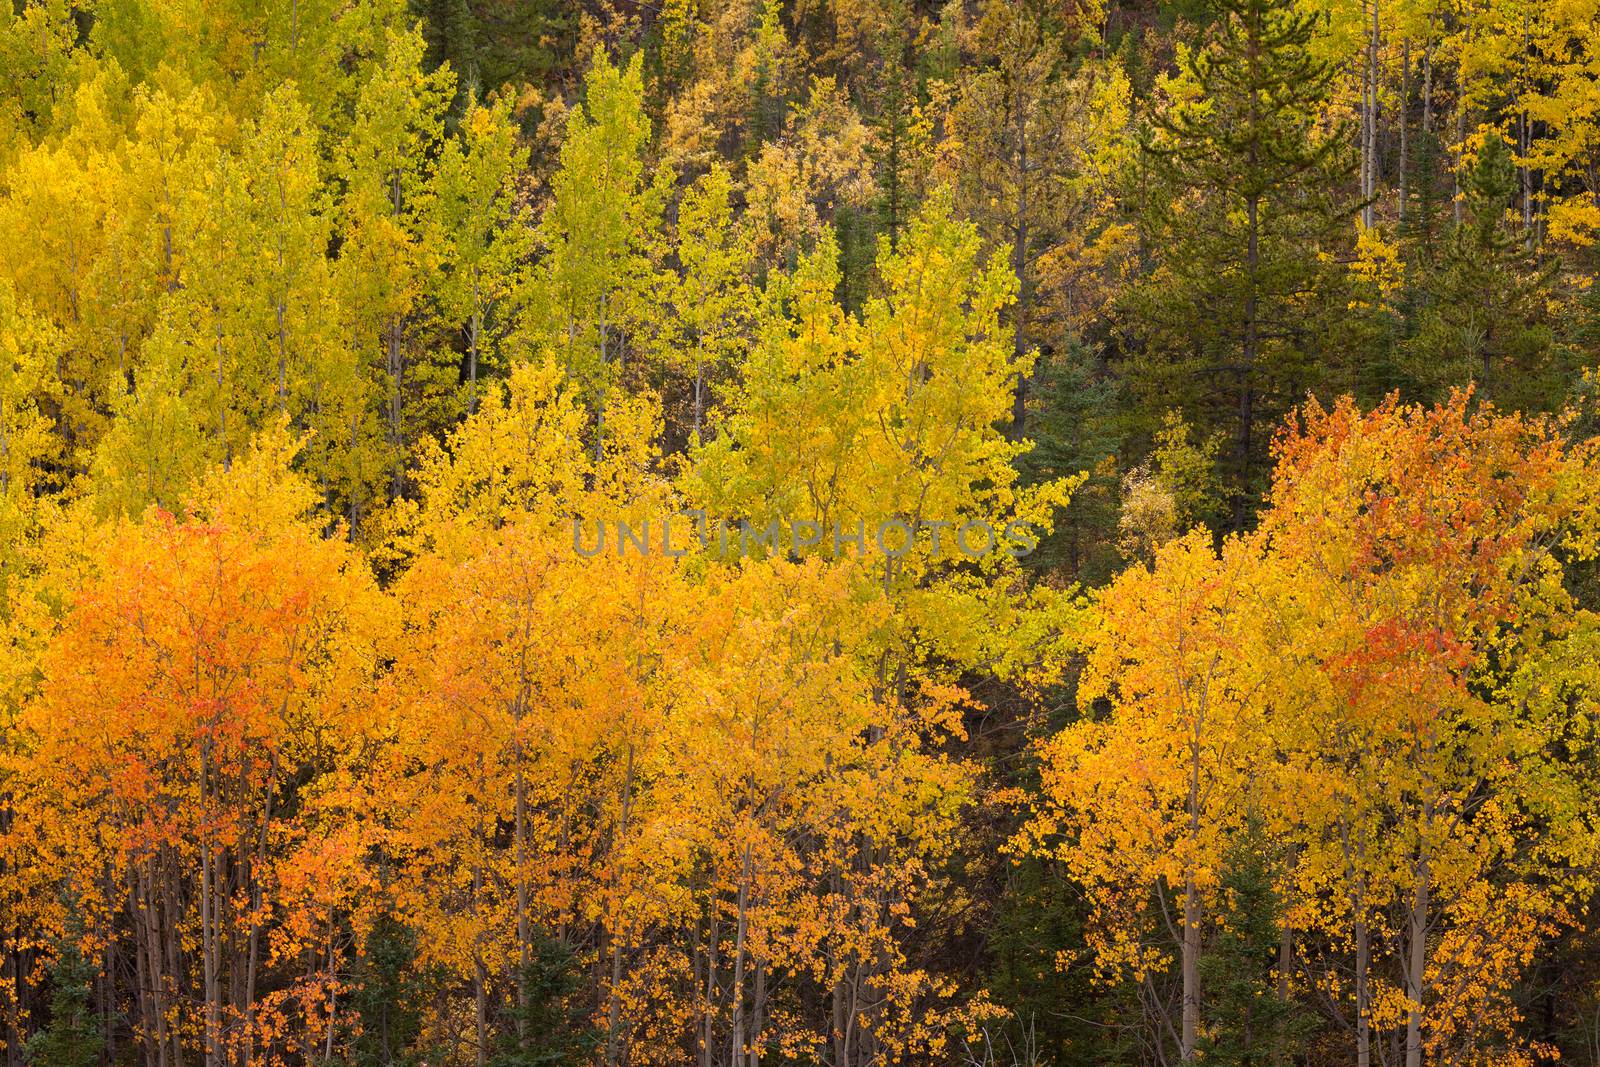 Colorful golden yellow autumn fall aspen trees, Populus tremuloides, of boreal forest taiga in the Yukon Territory, Canada